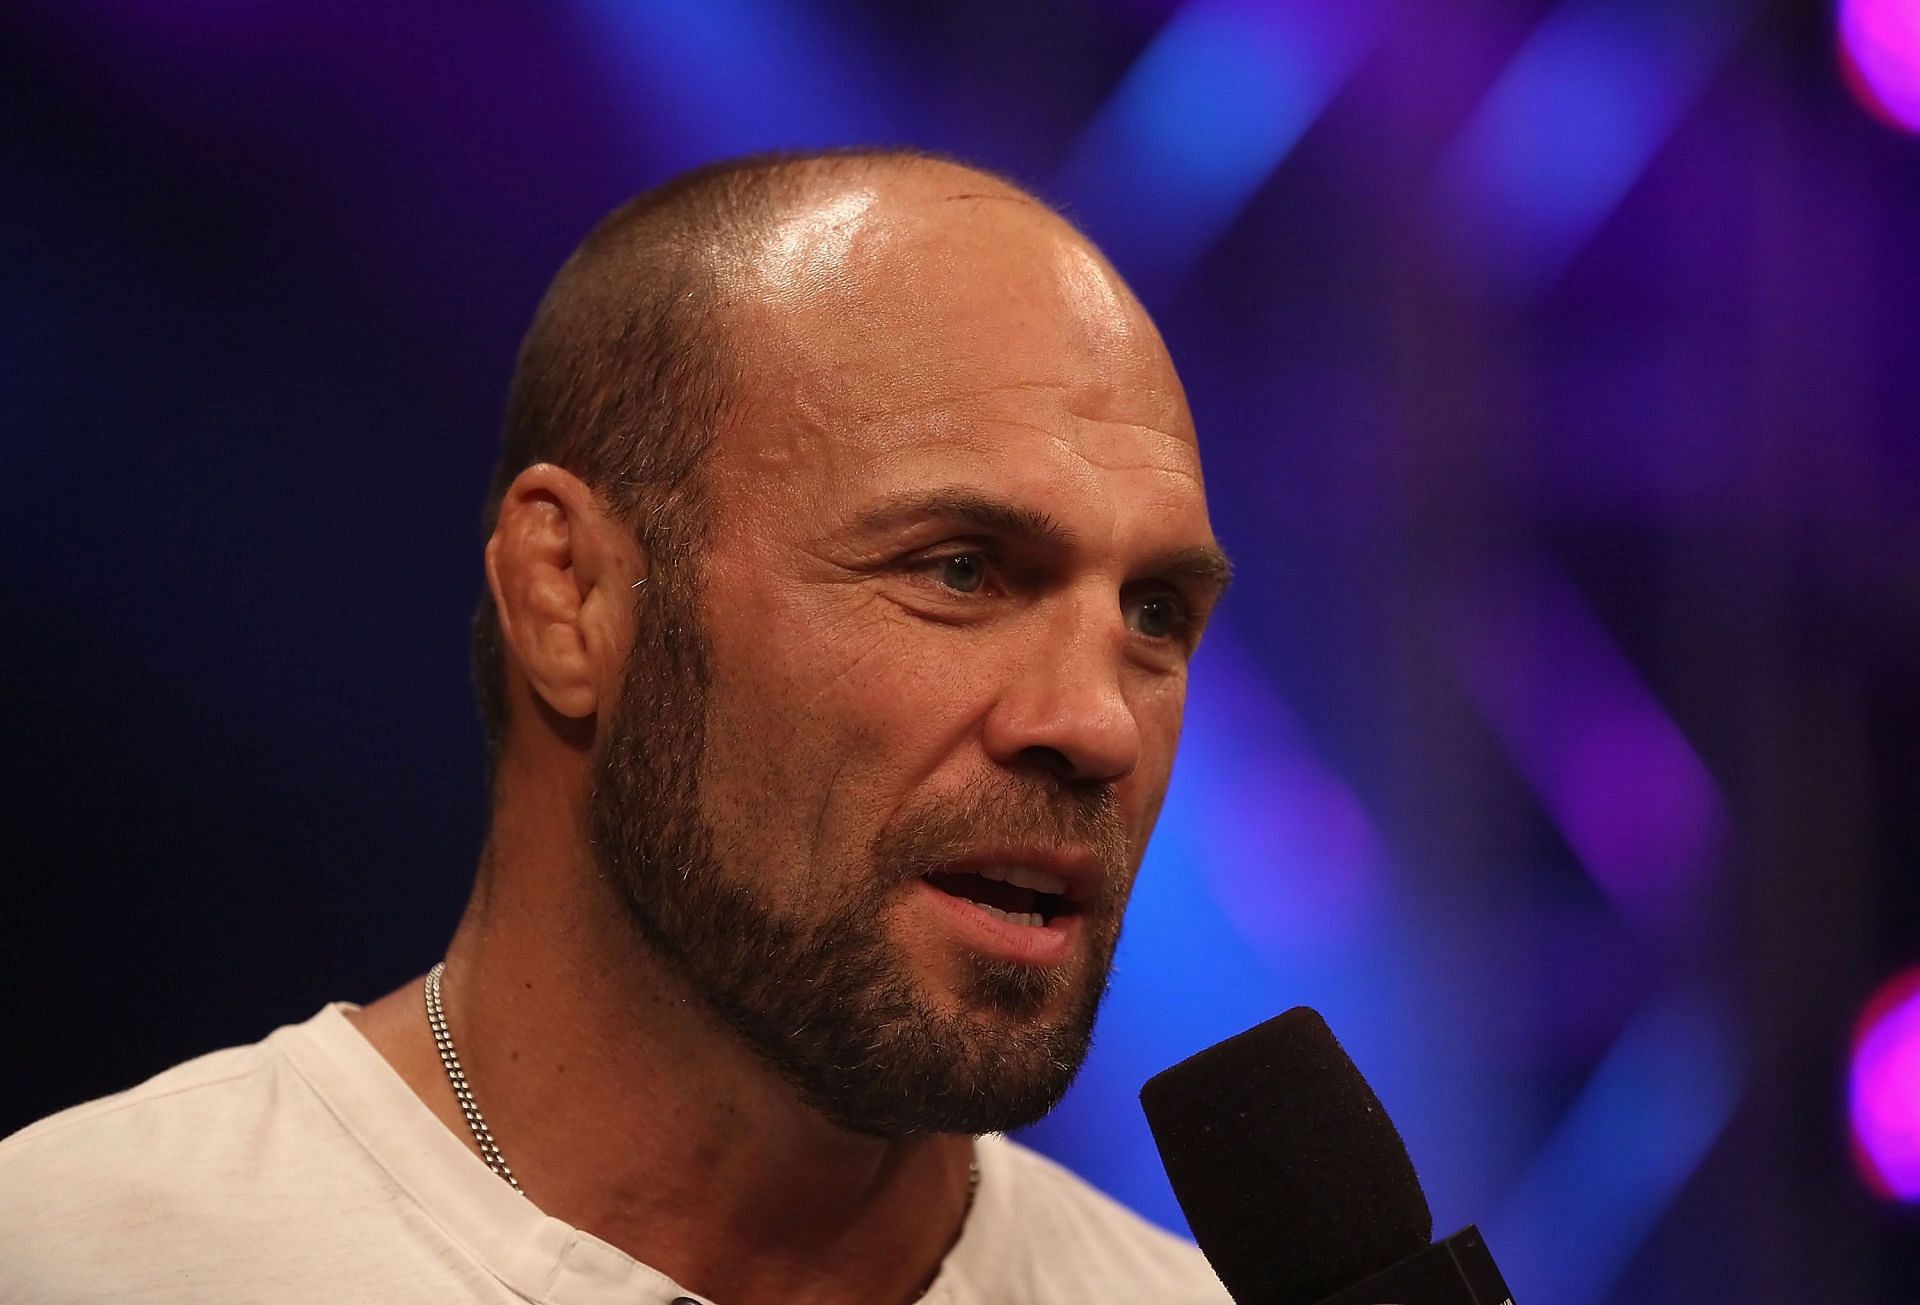 Randy Couture resigned from the UFC in 2007, but returned a year later to the surprise of many